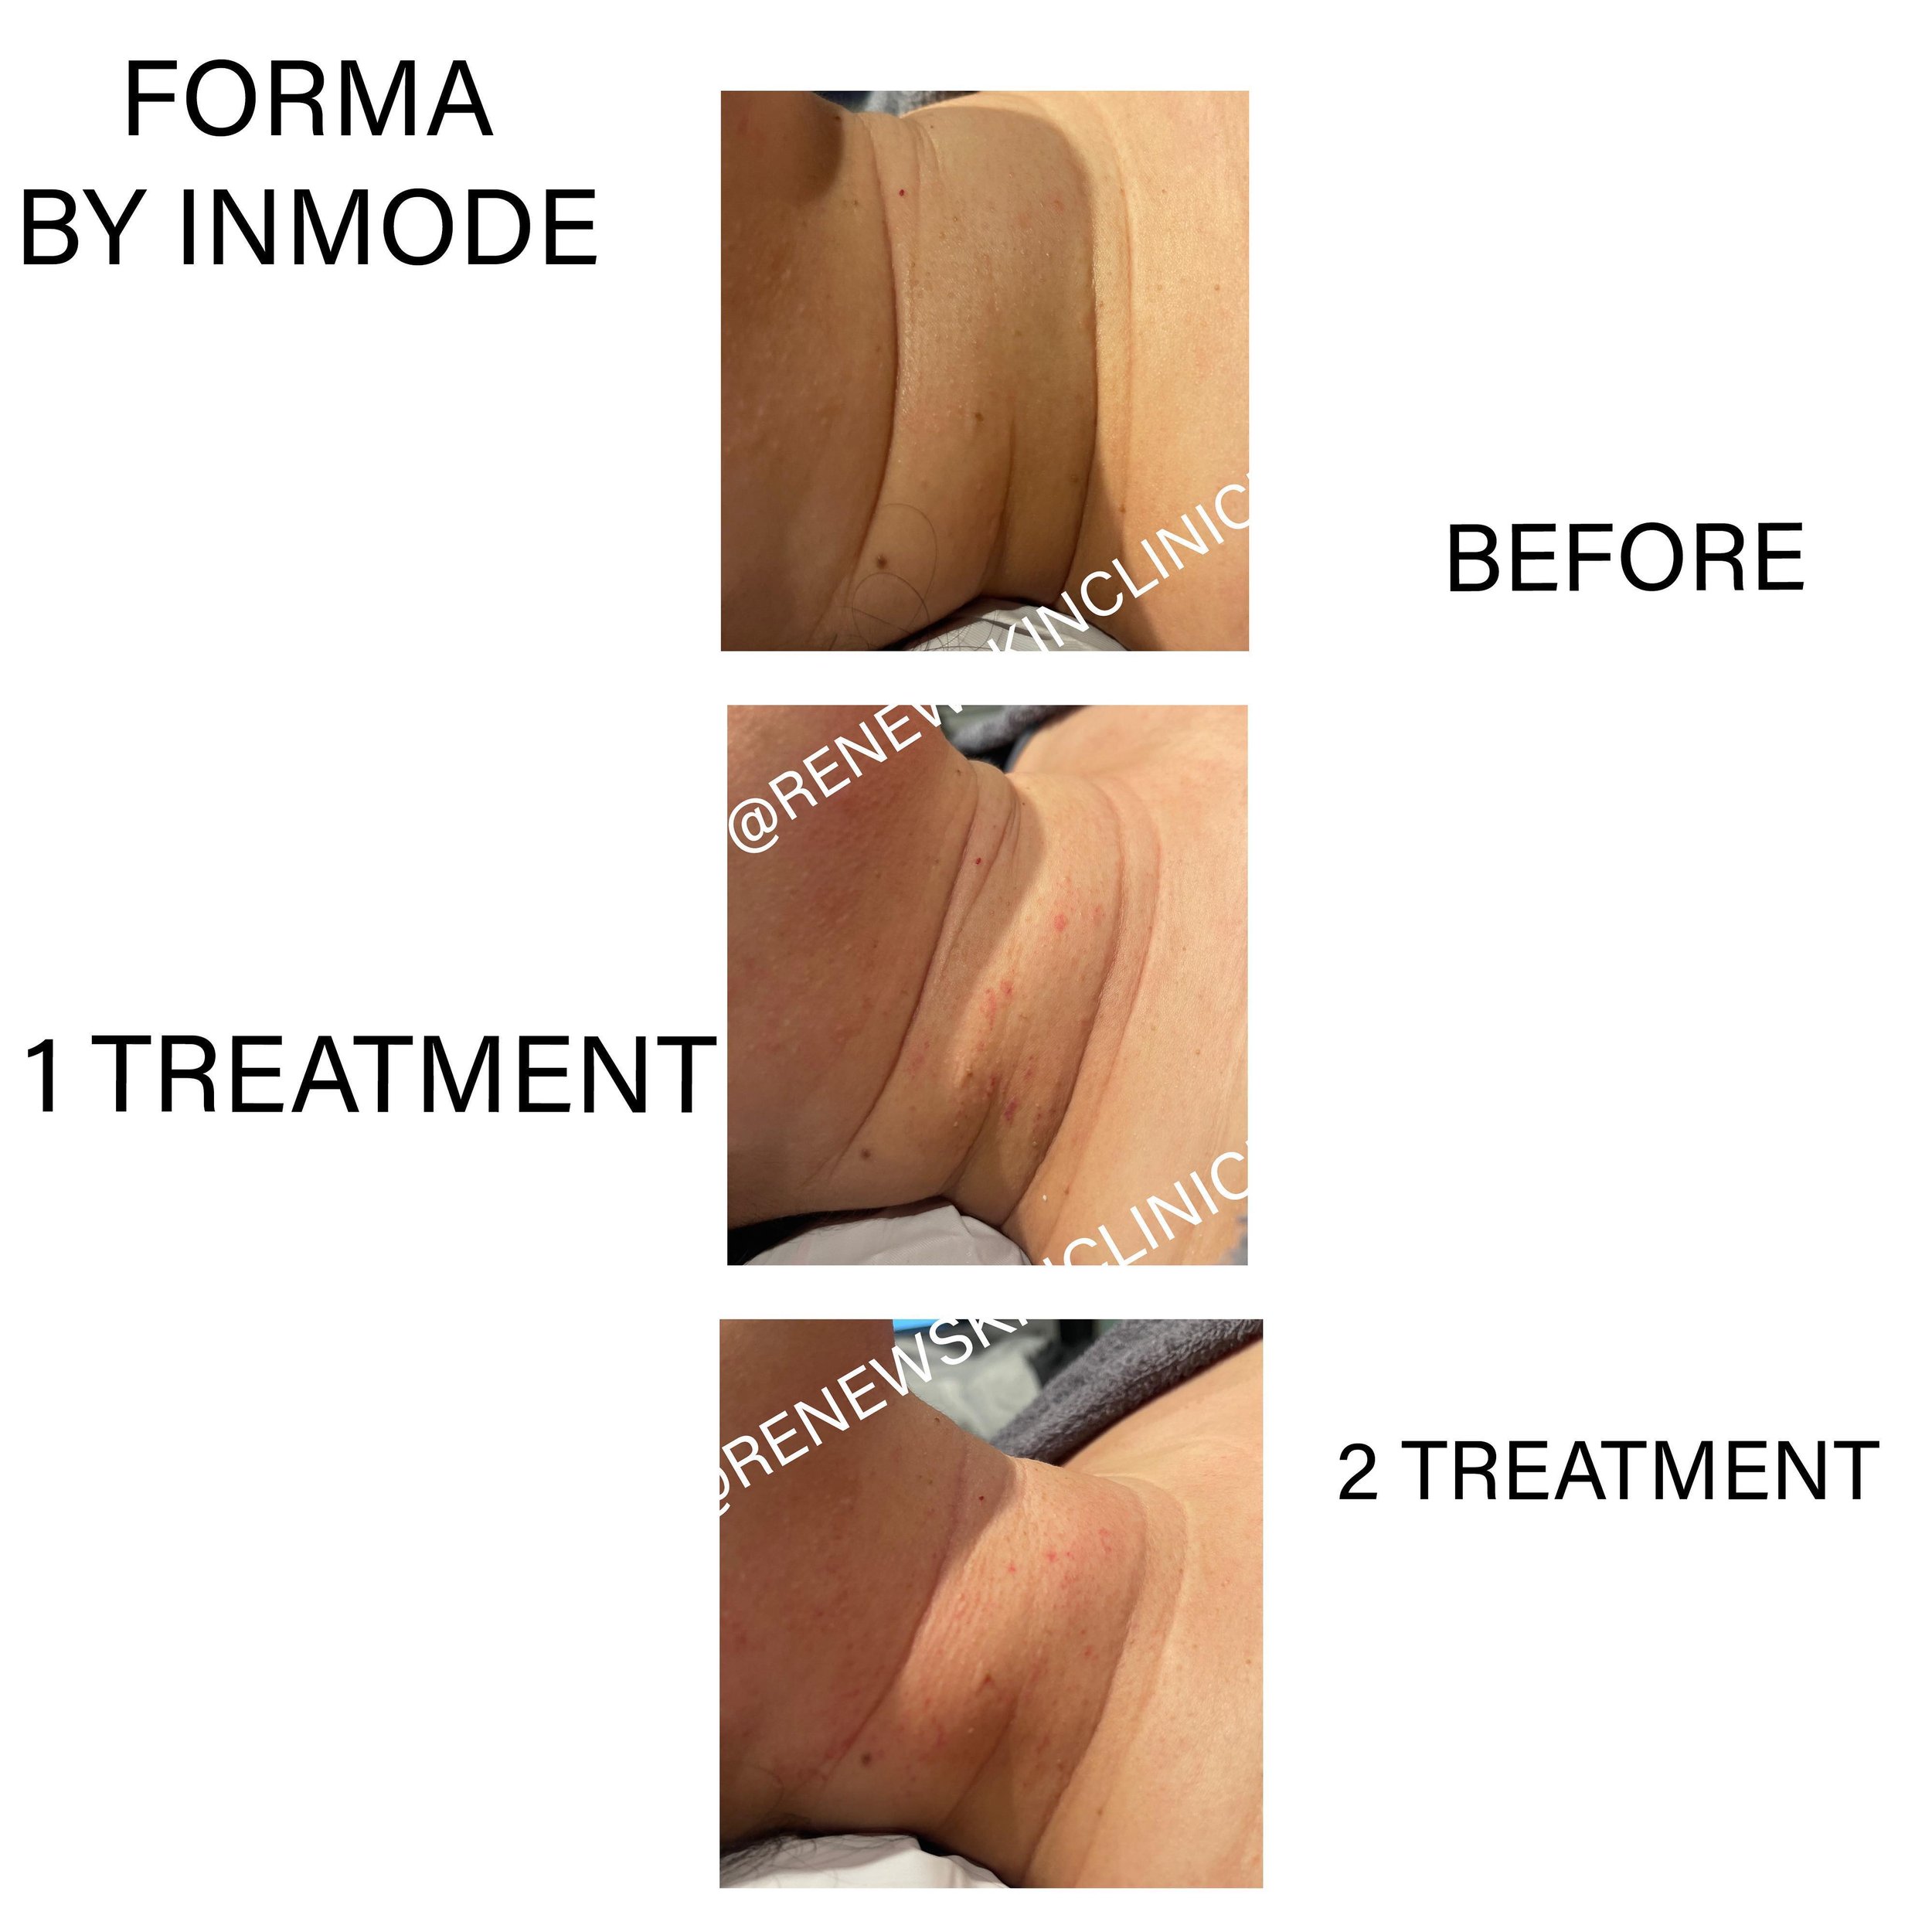 FORMA HERE WE COME!!🙌
.
.
👉👉LOOOK AT HER AMAZING RESULTS!! .
.
☑️tightening  of the Neck 
☑️decrease appearances loose skin 
☑️stimulation of collagen production + elastin.
☑️skin feels firmer + smoother to touch as per the client .
☑️some of the 